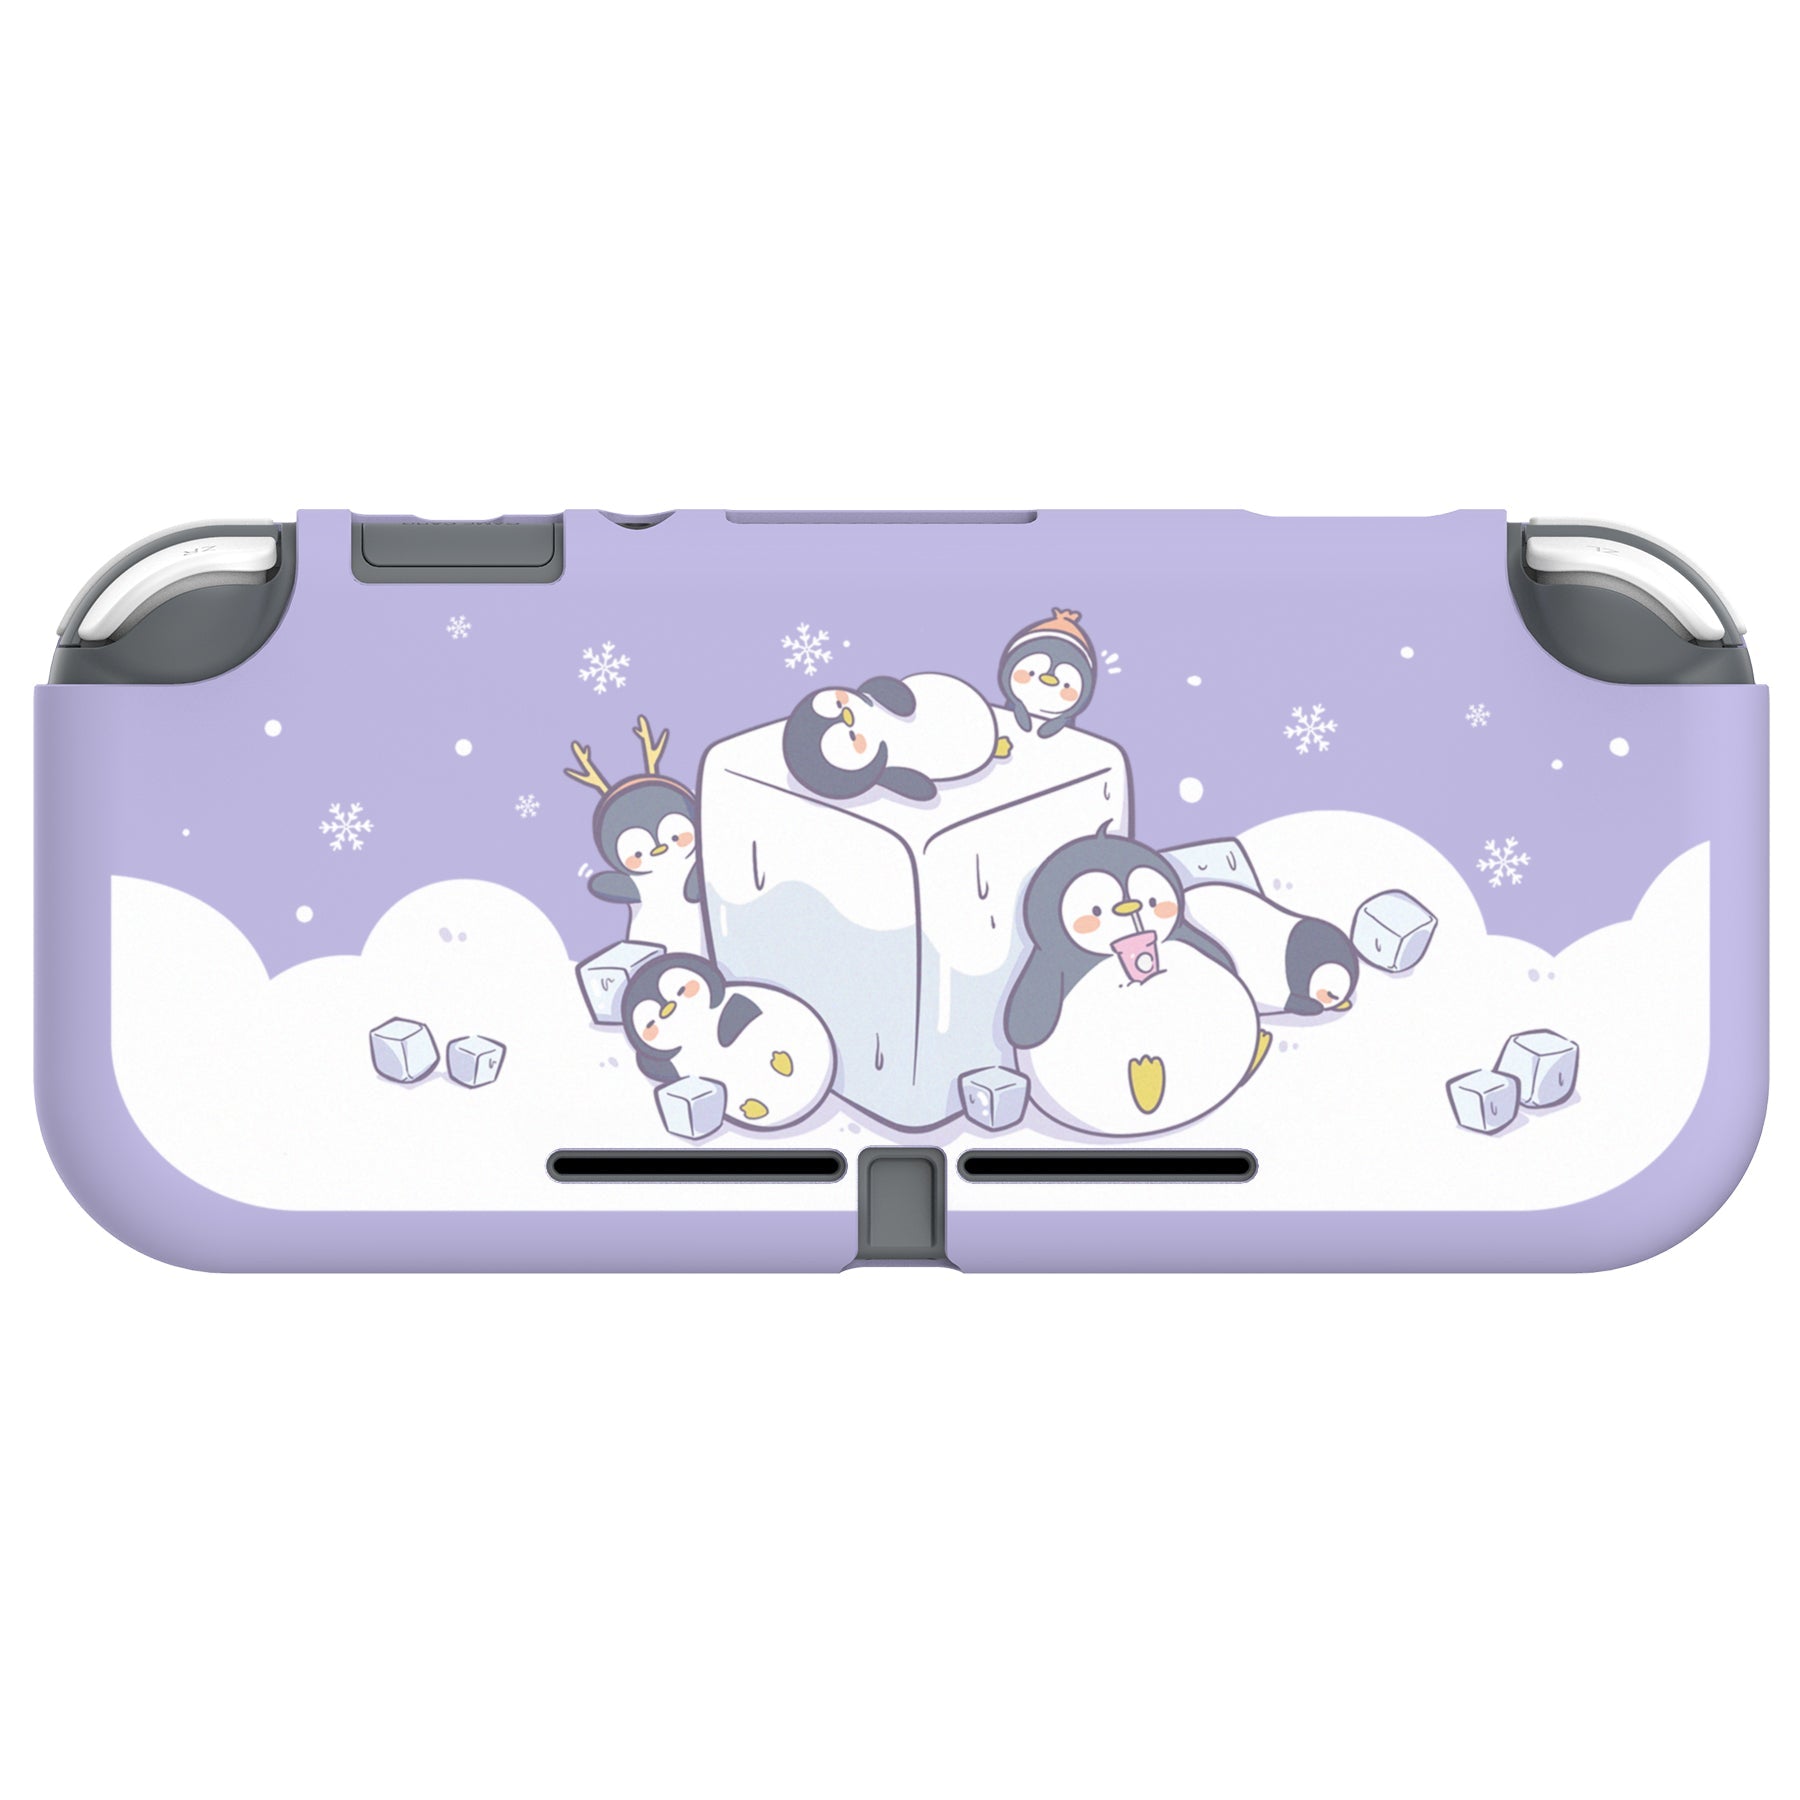 PlayVital Icy Cube Penguin Custom Protective Case for NS Switch Lite, Soft TPU Slim Case Cover for NS Switch Lite - LTU6009 PlayVital